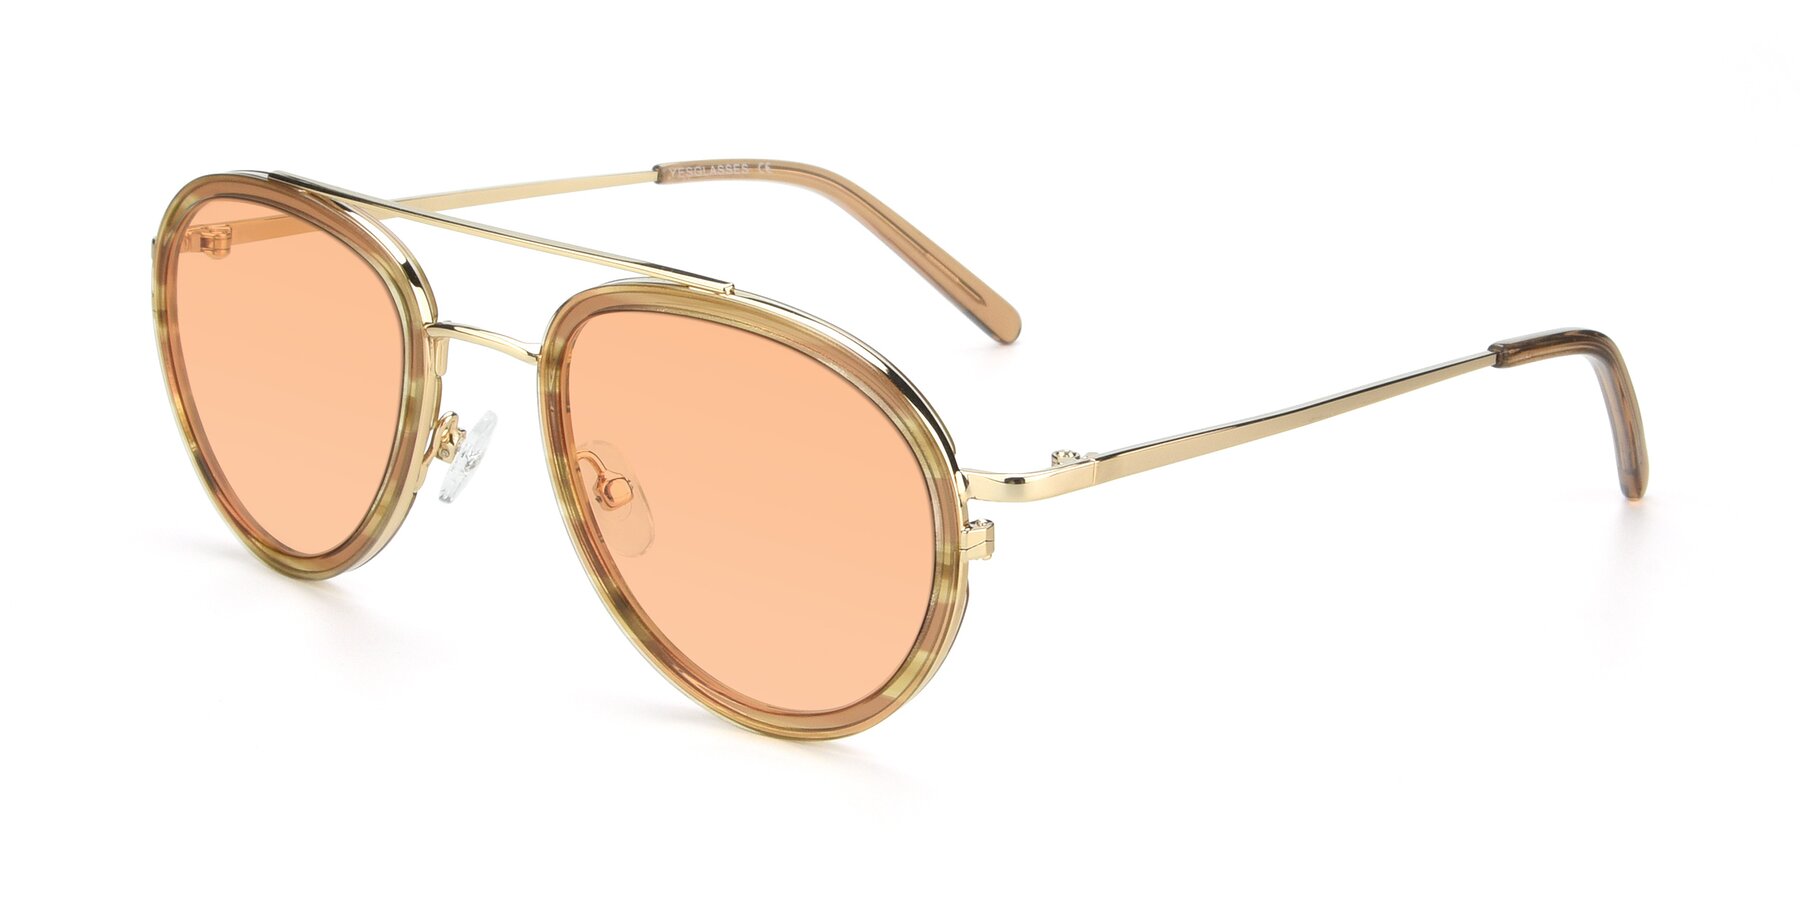 Angle of 9554 in Gold-Caramel with Light Orange Tinted Lenses